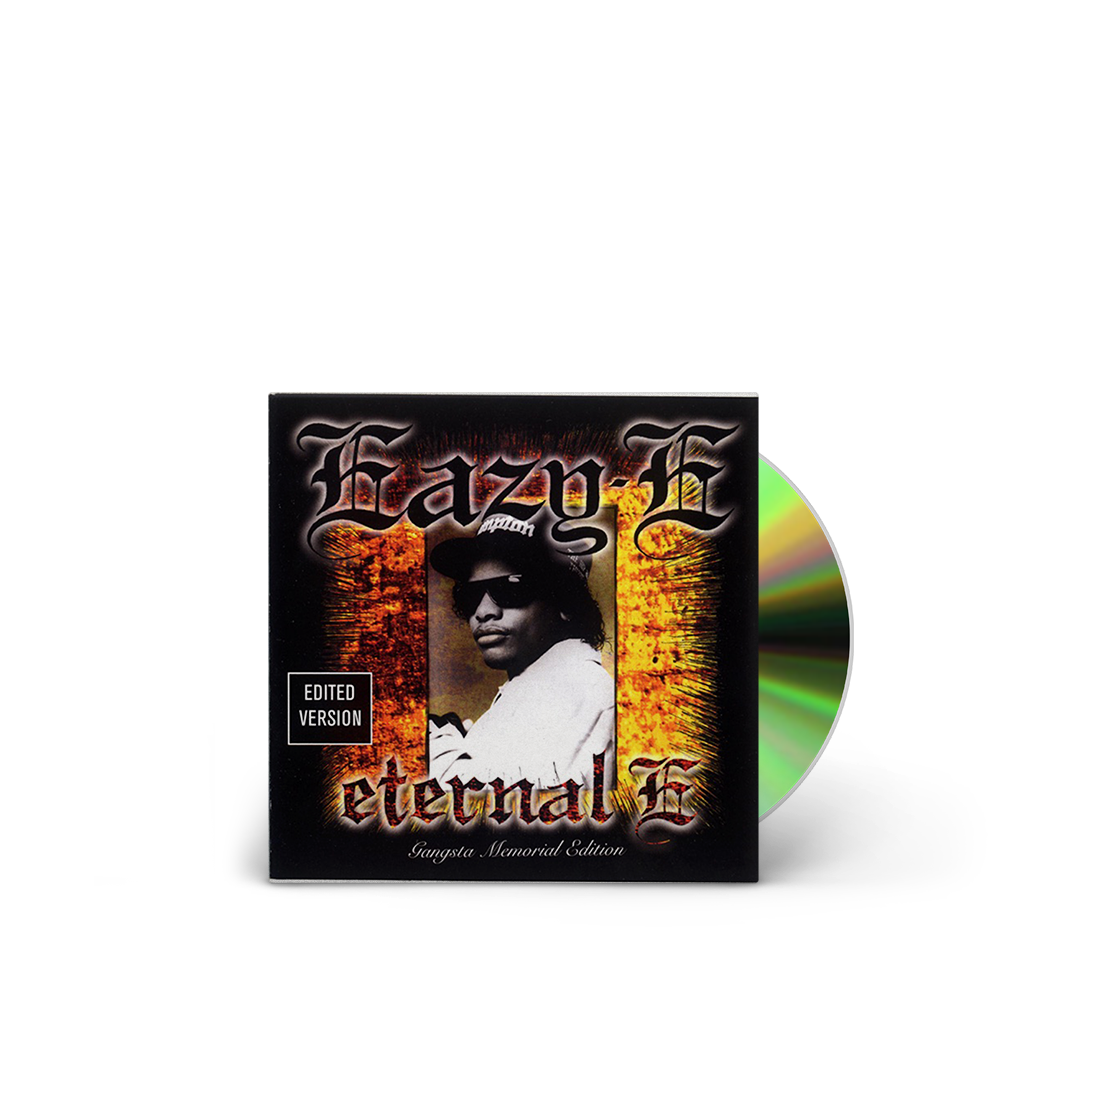 Eazy-Duz-It by Eazy-E (Album, Gangsta Rap): Reviews, Ratings, Credits, Song  list - Rate Your Music